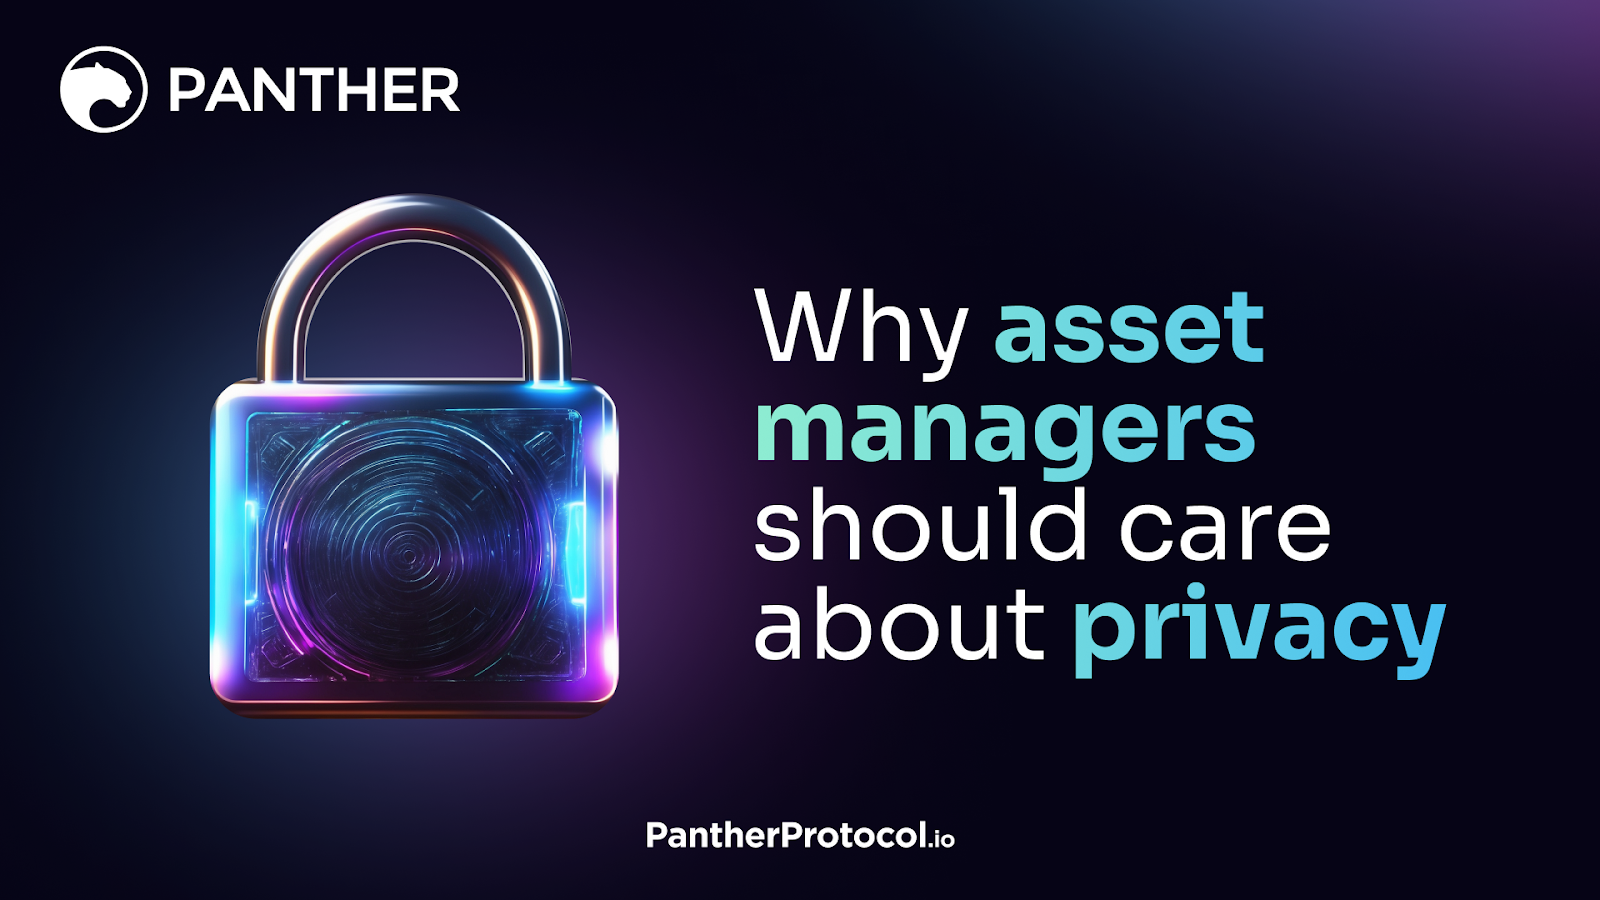 Why asset managers should care about privacy